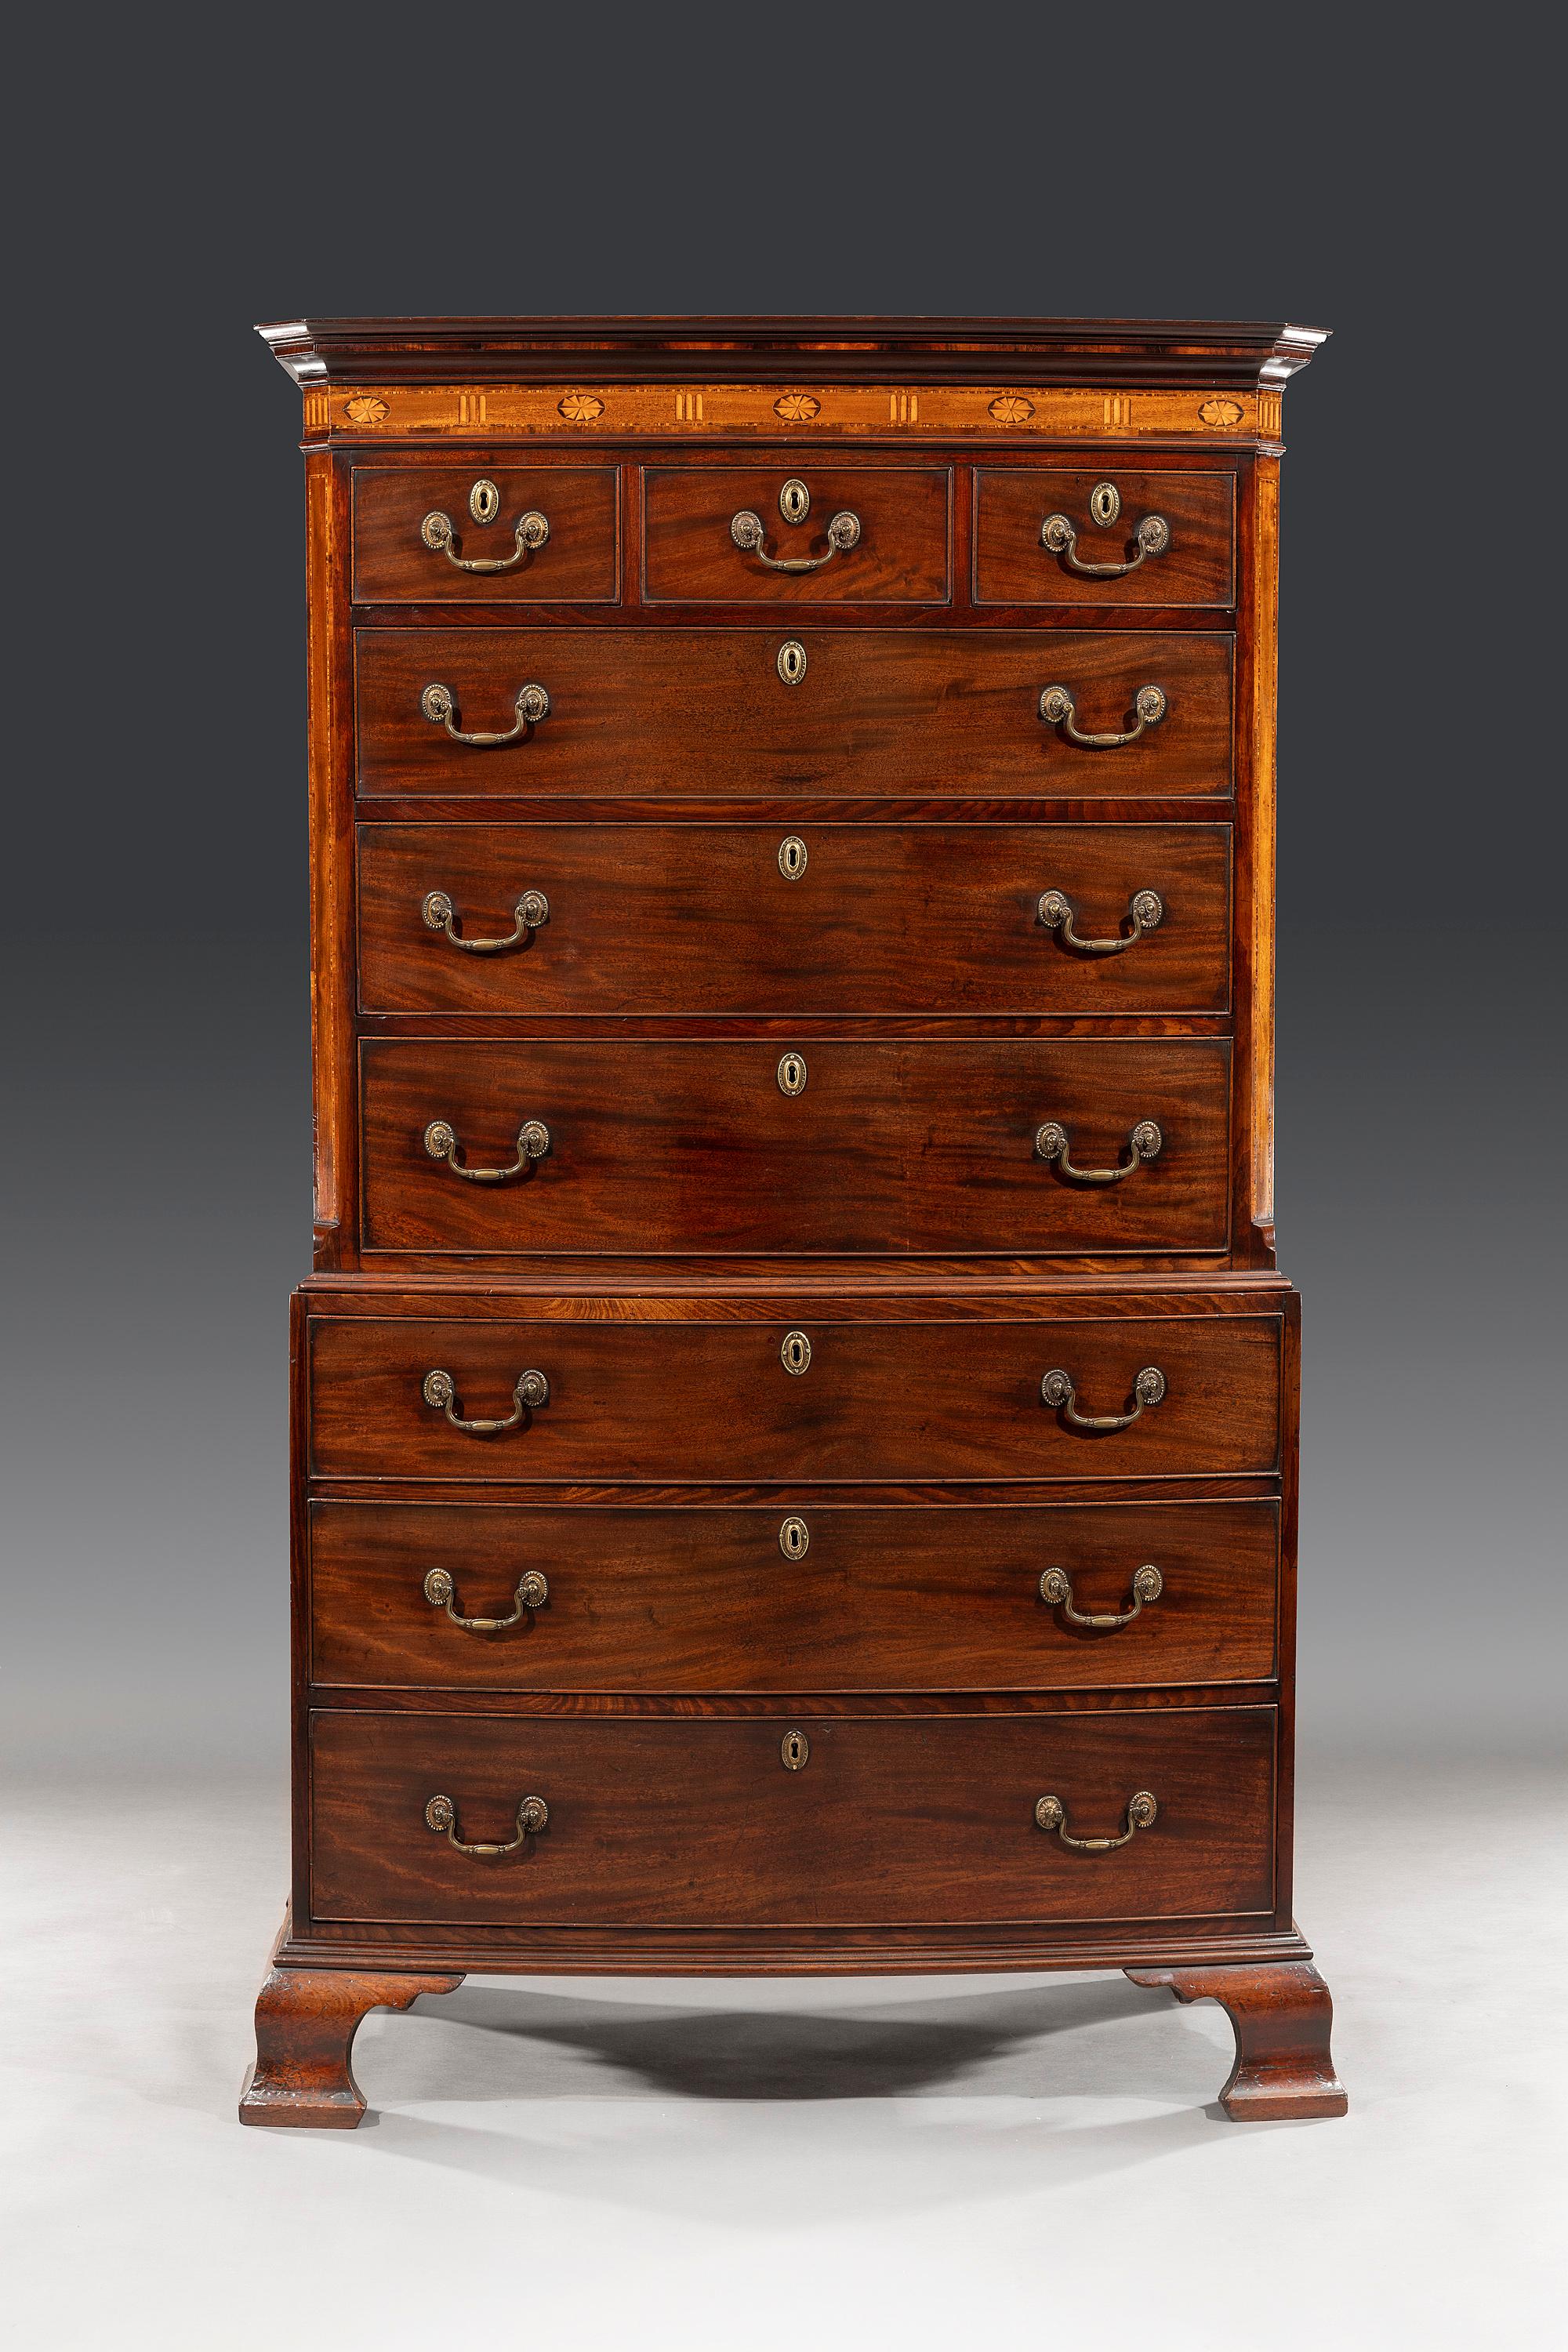 George III Adam Period 18th Century Bow-Fronted Inlaid Chest on Chest In Good Condition For Sale In Bradford on Avon, GB